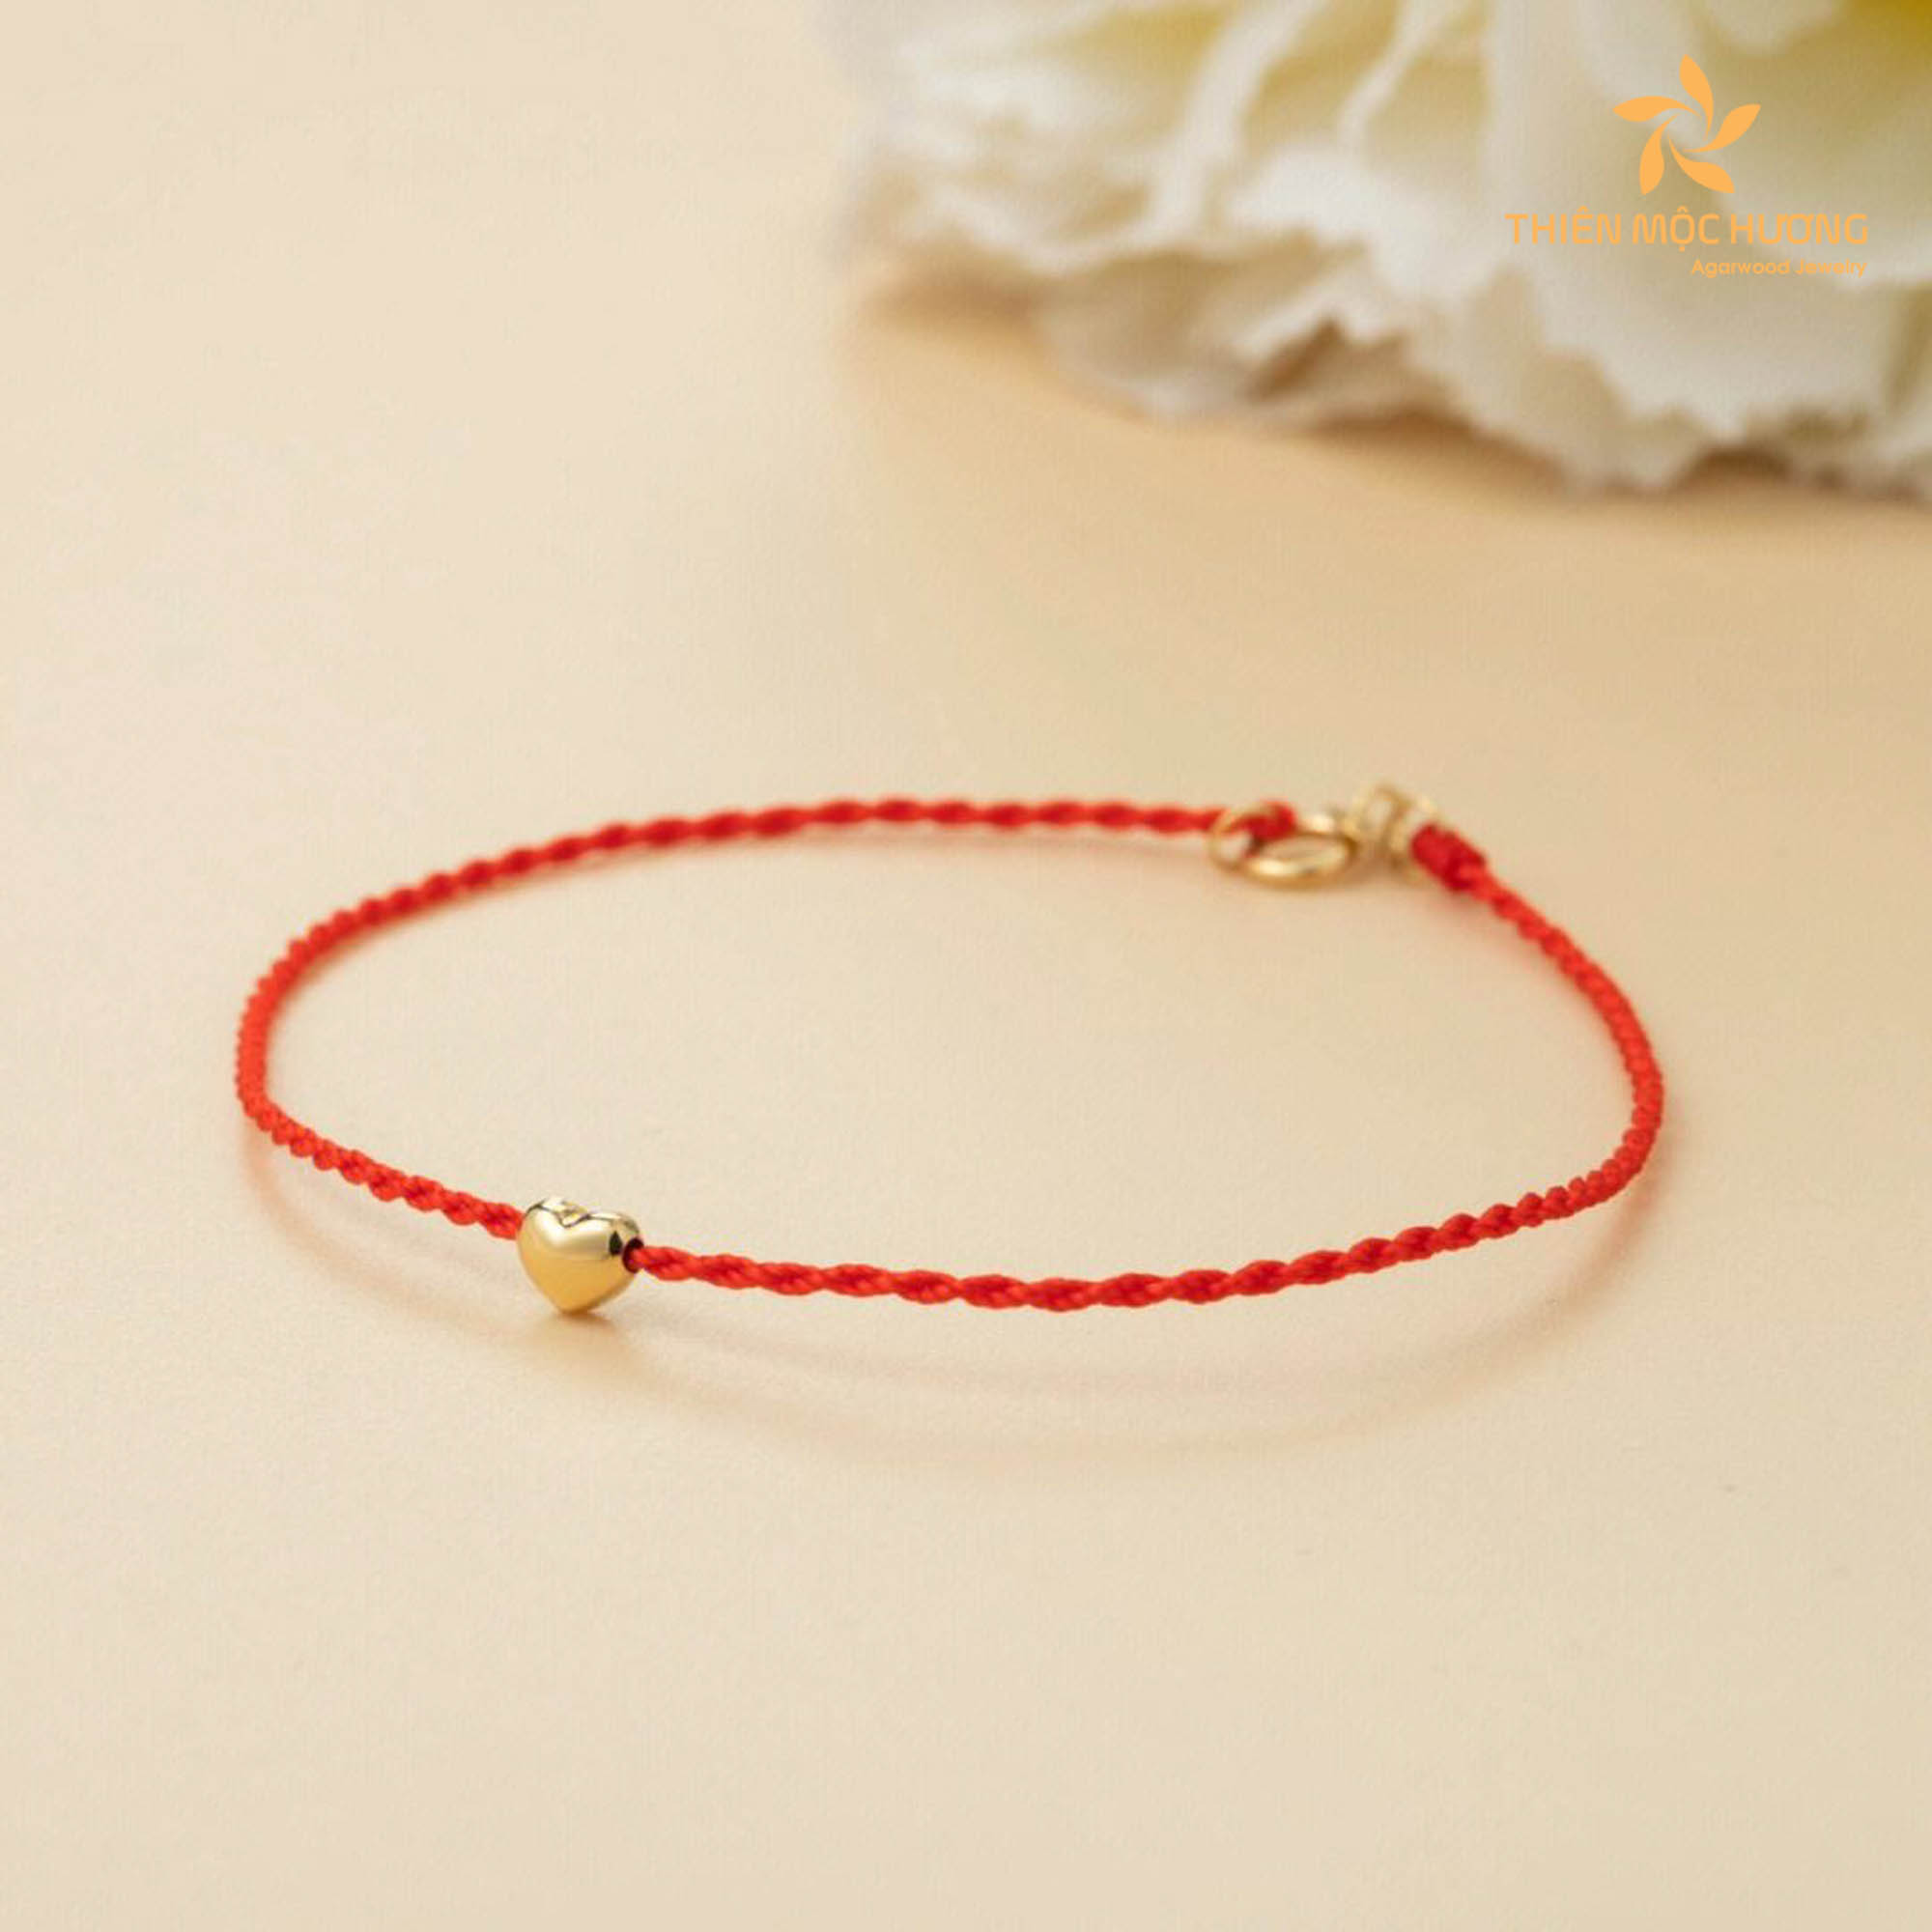 How to properly remove a red string bracelet